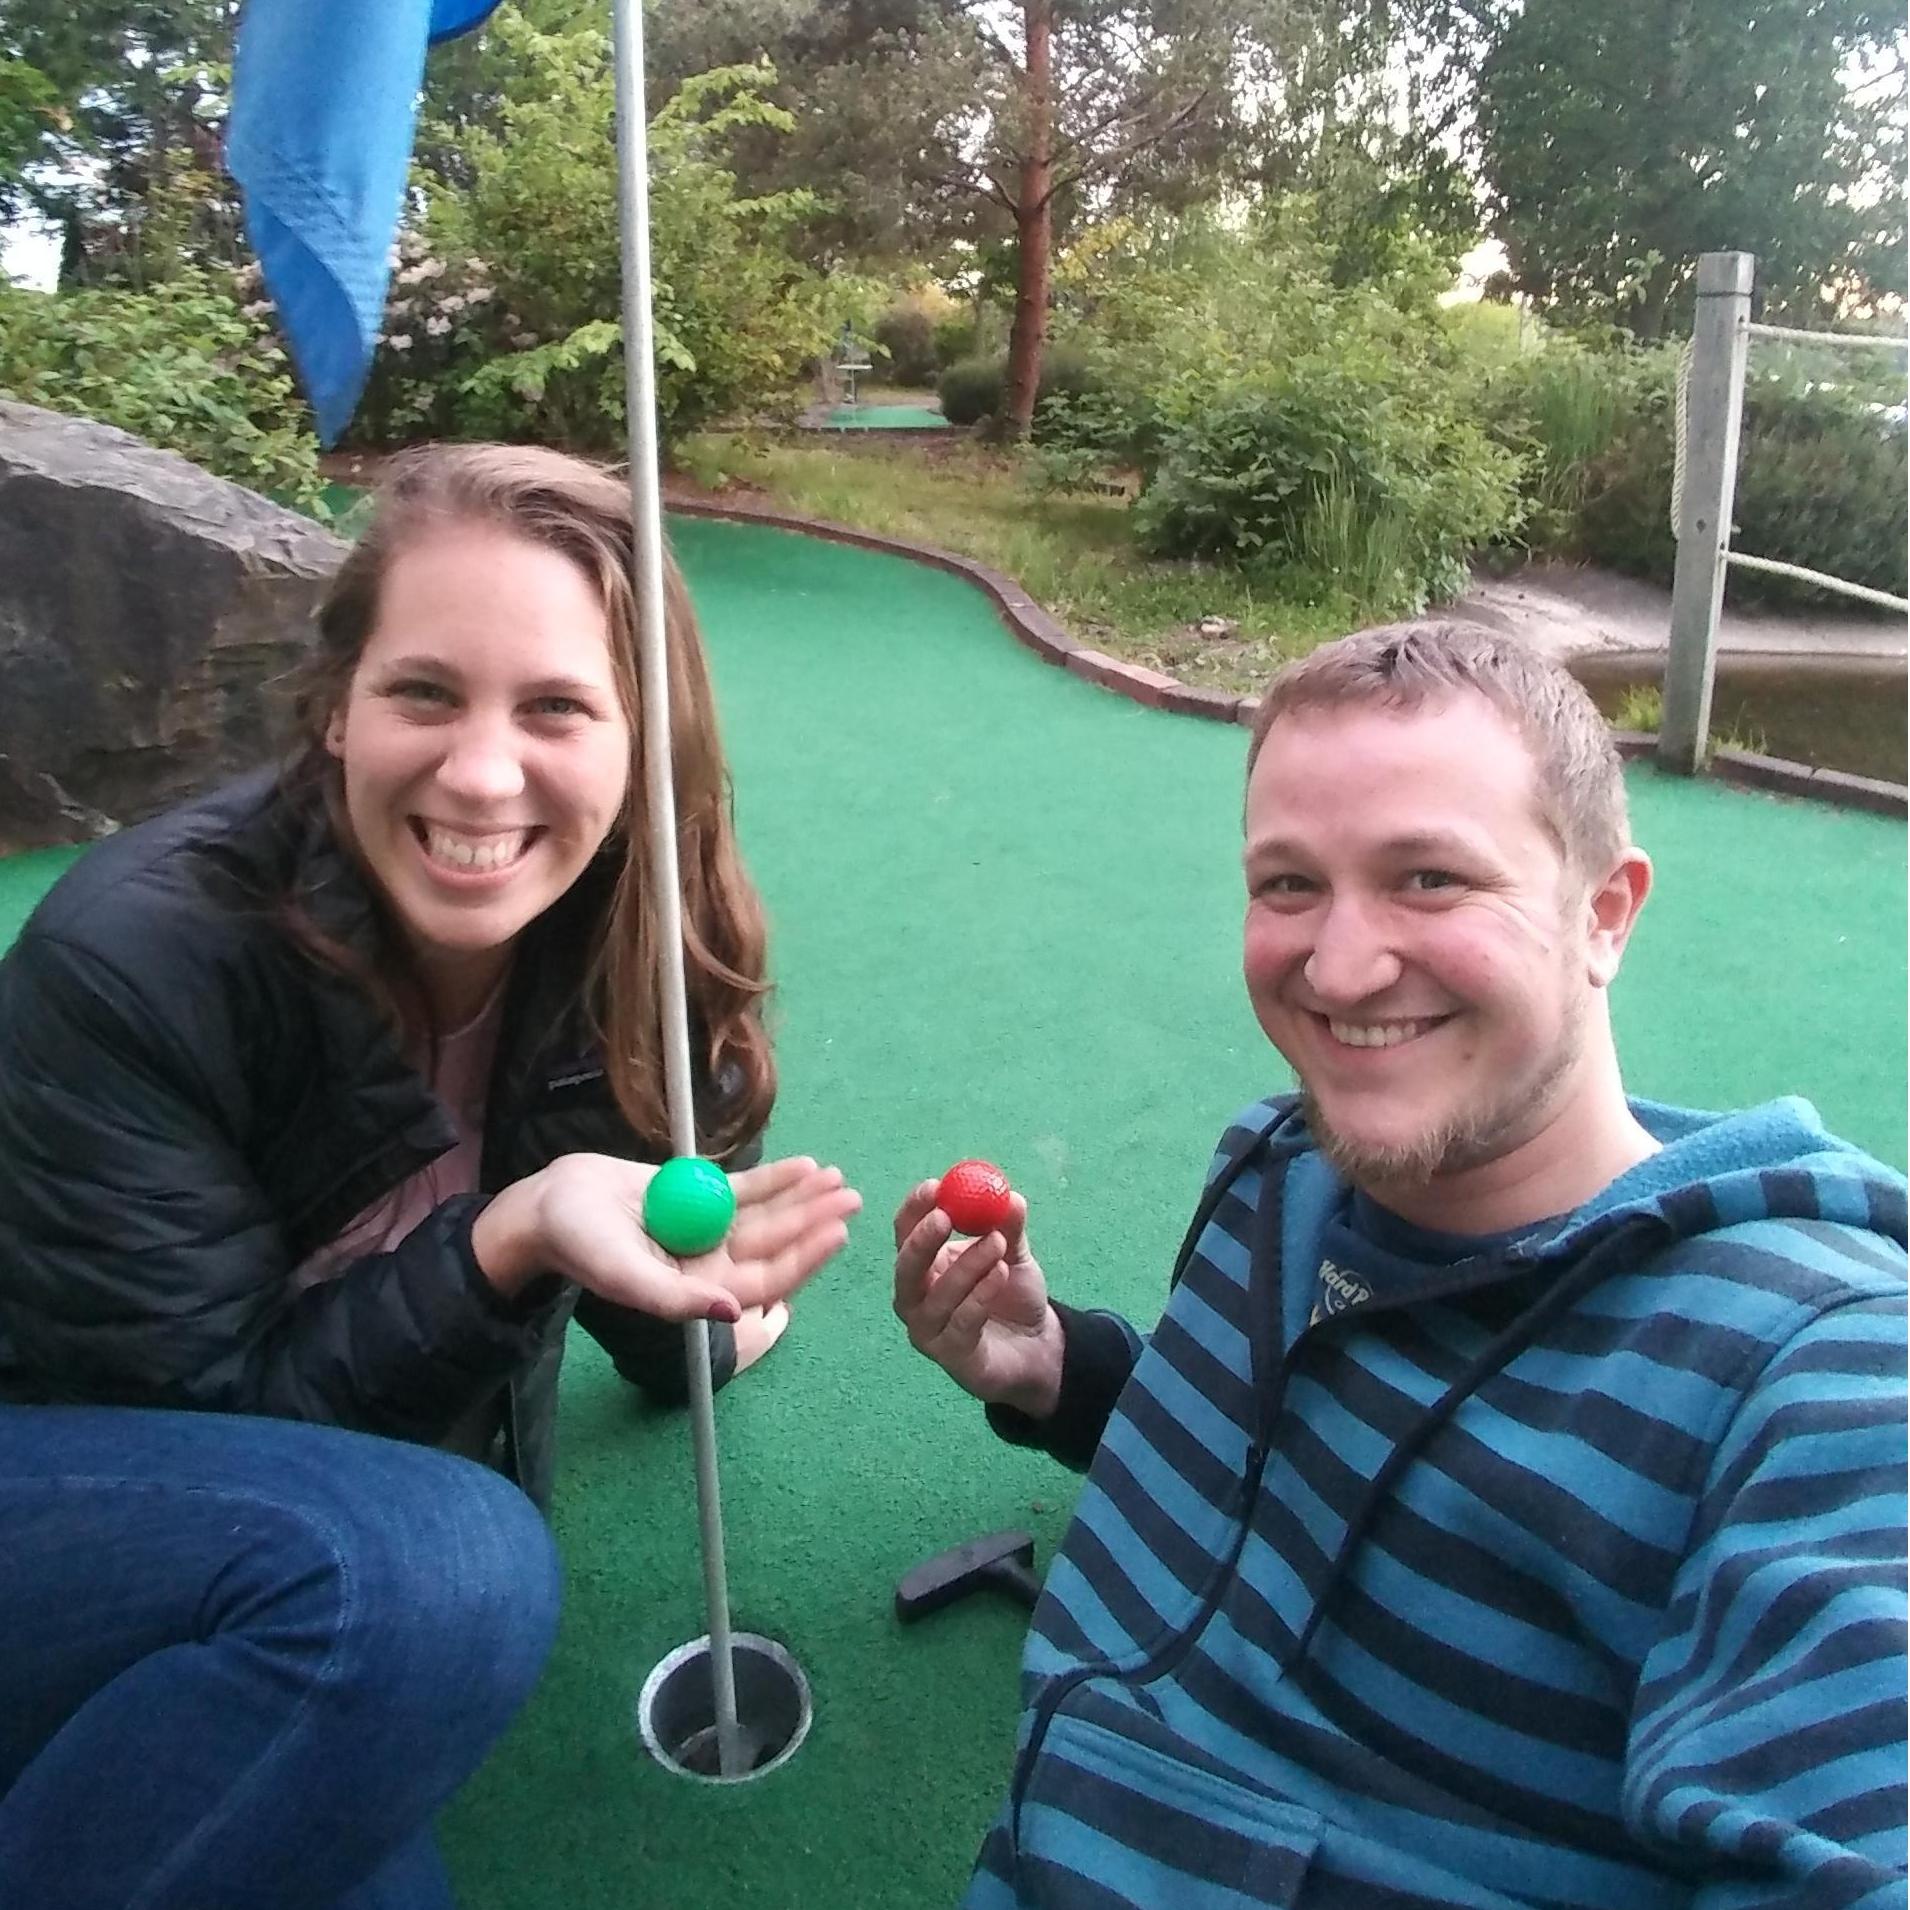 Minigolf, it was one of Saylah's favorite dates.